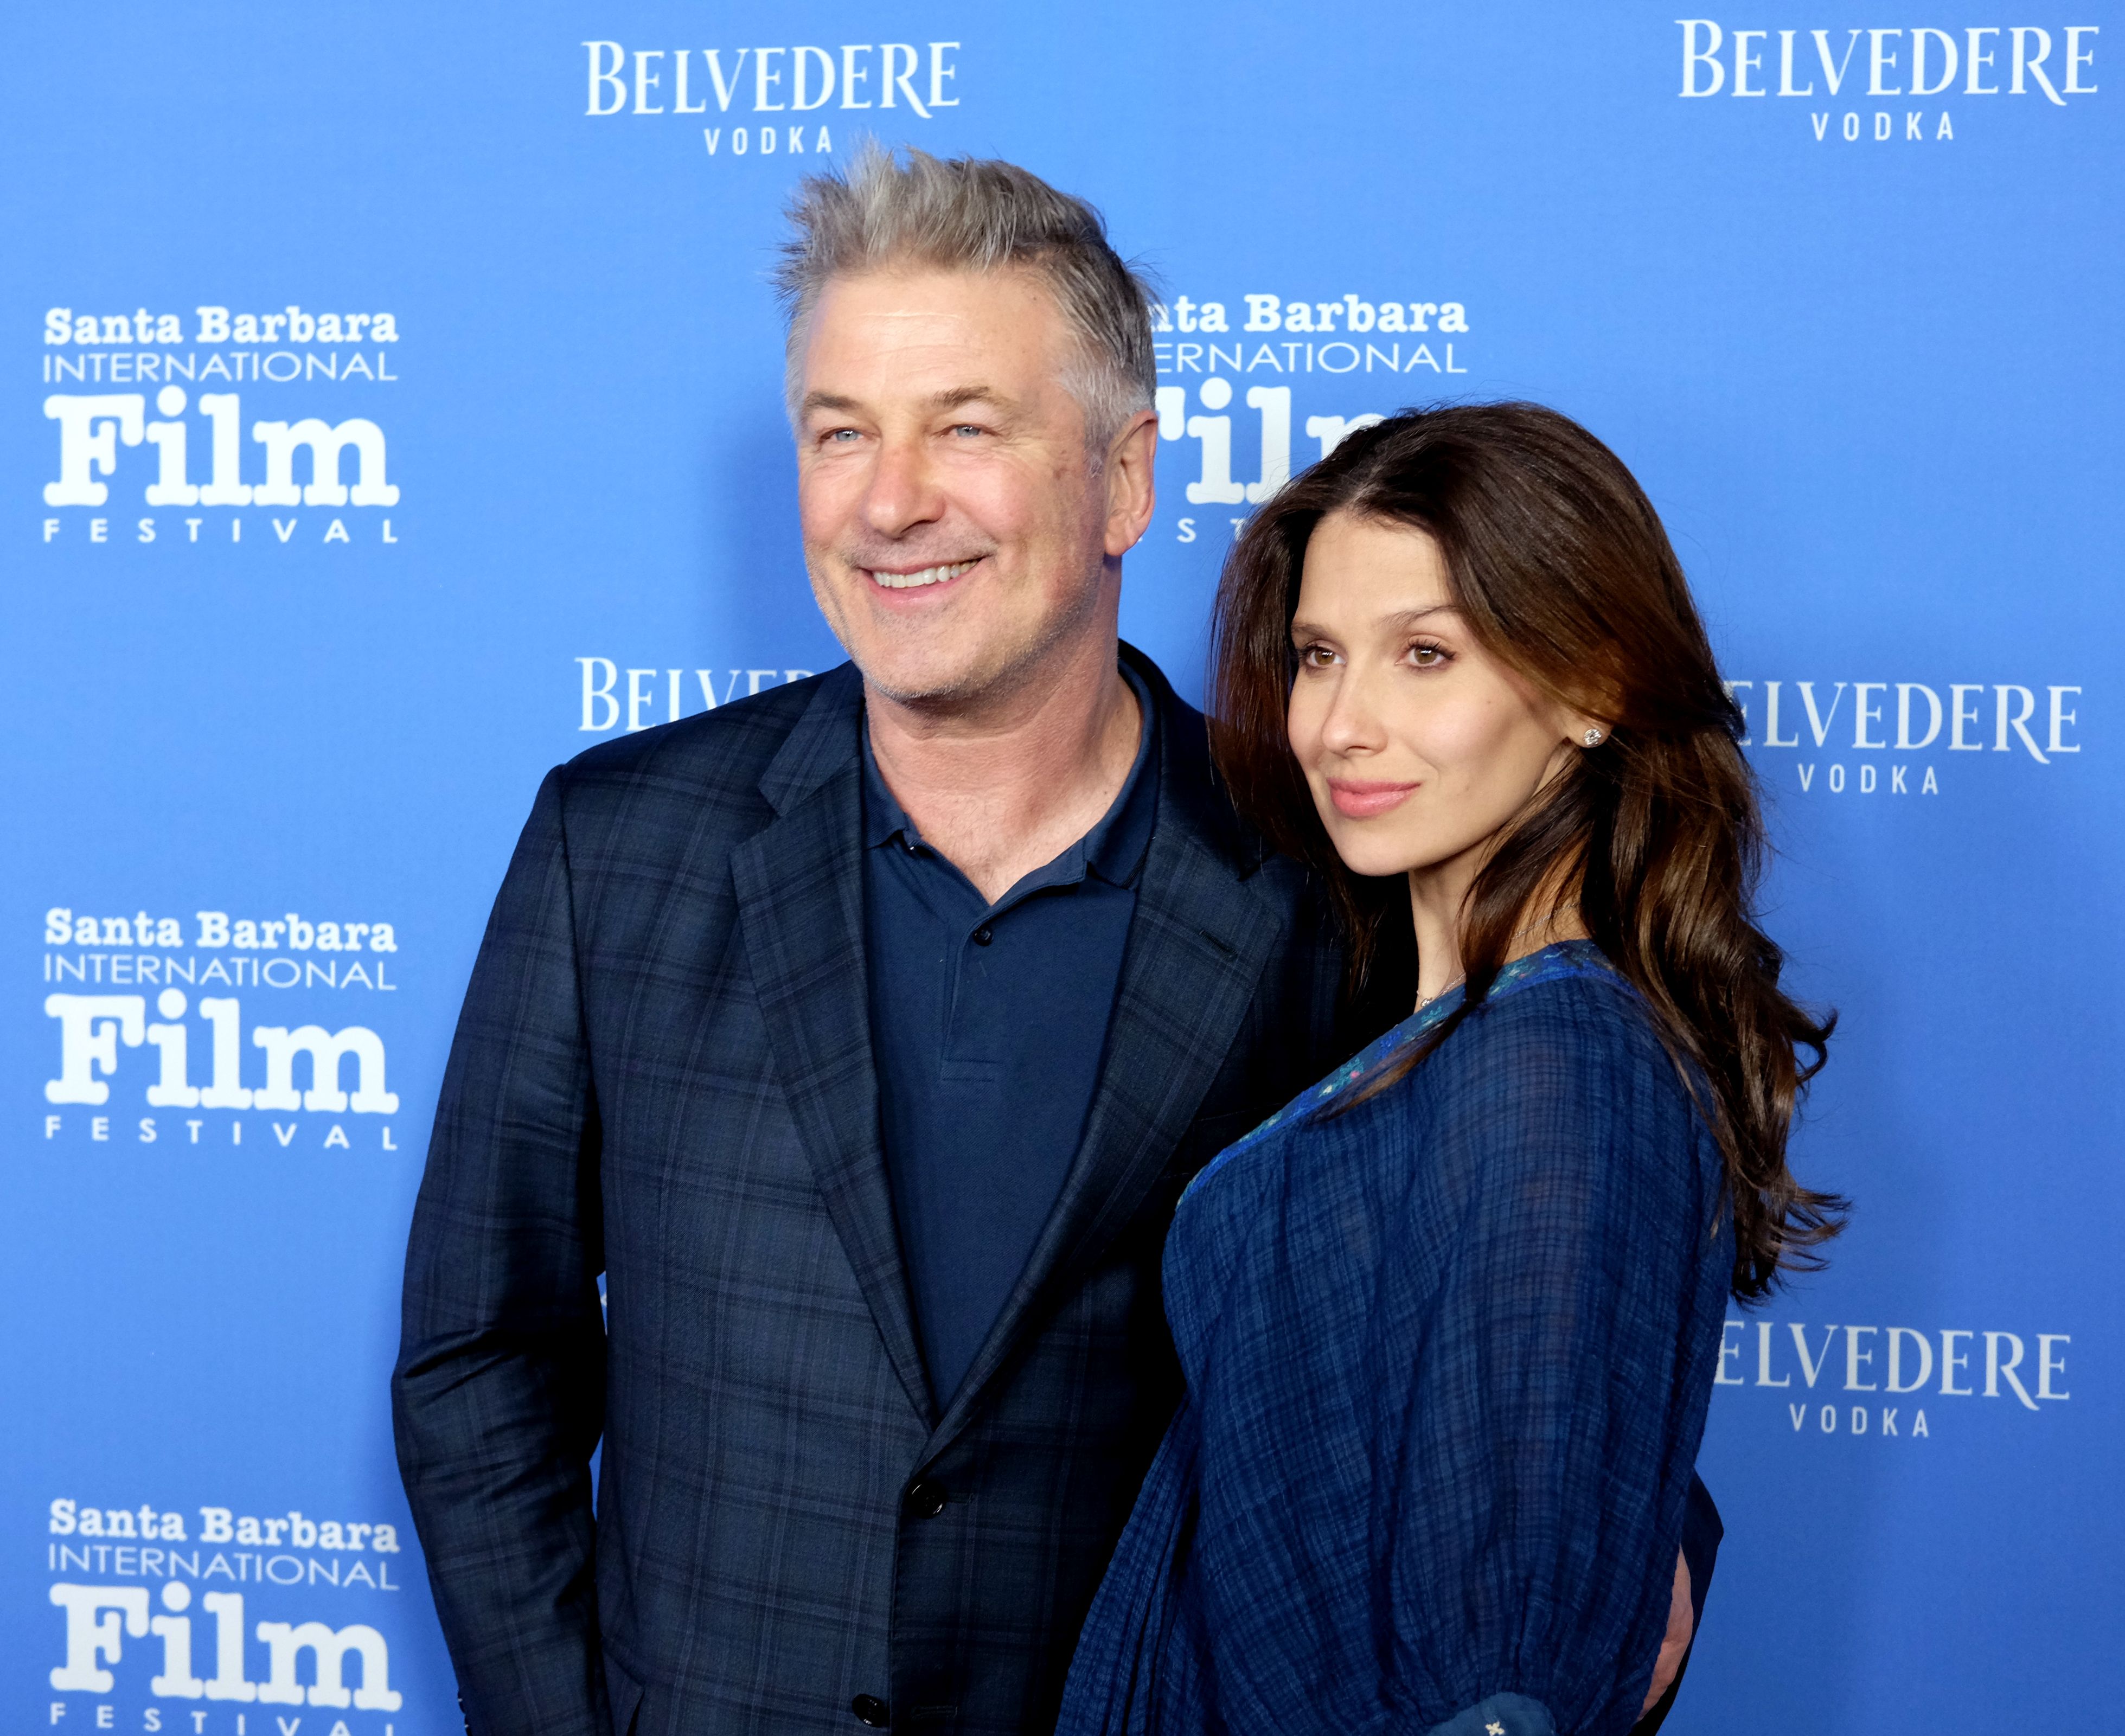 Alec Baldwin and Hilaria Baldwin at the Opening Night Film "The Public" Presented by Belvedere Vodka during the 33rd Santa Barbara International Film Festival at Arlington Theatre on January 31, 2018 in Santa Barbara, California. | Source: Getty Images